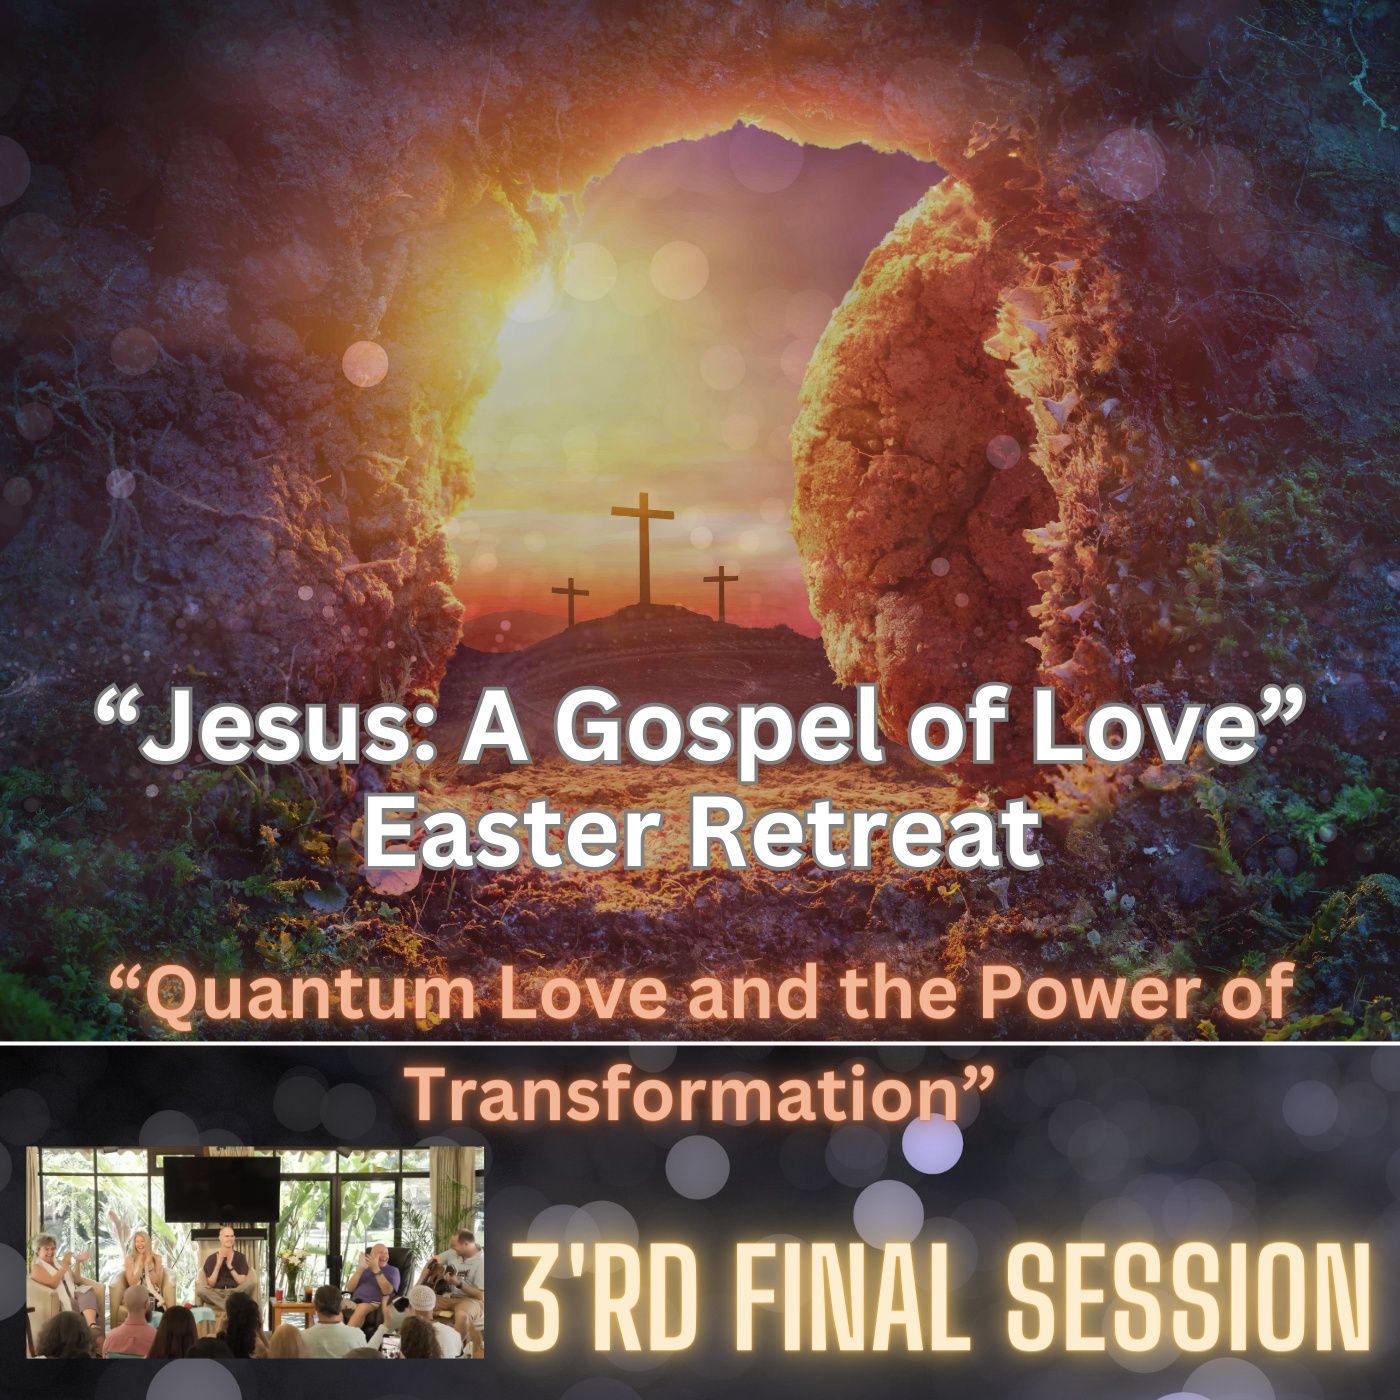 “Quantum Love and the Power of Transformation” - Easter Retreat 3’rd Final Session